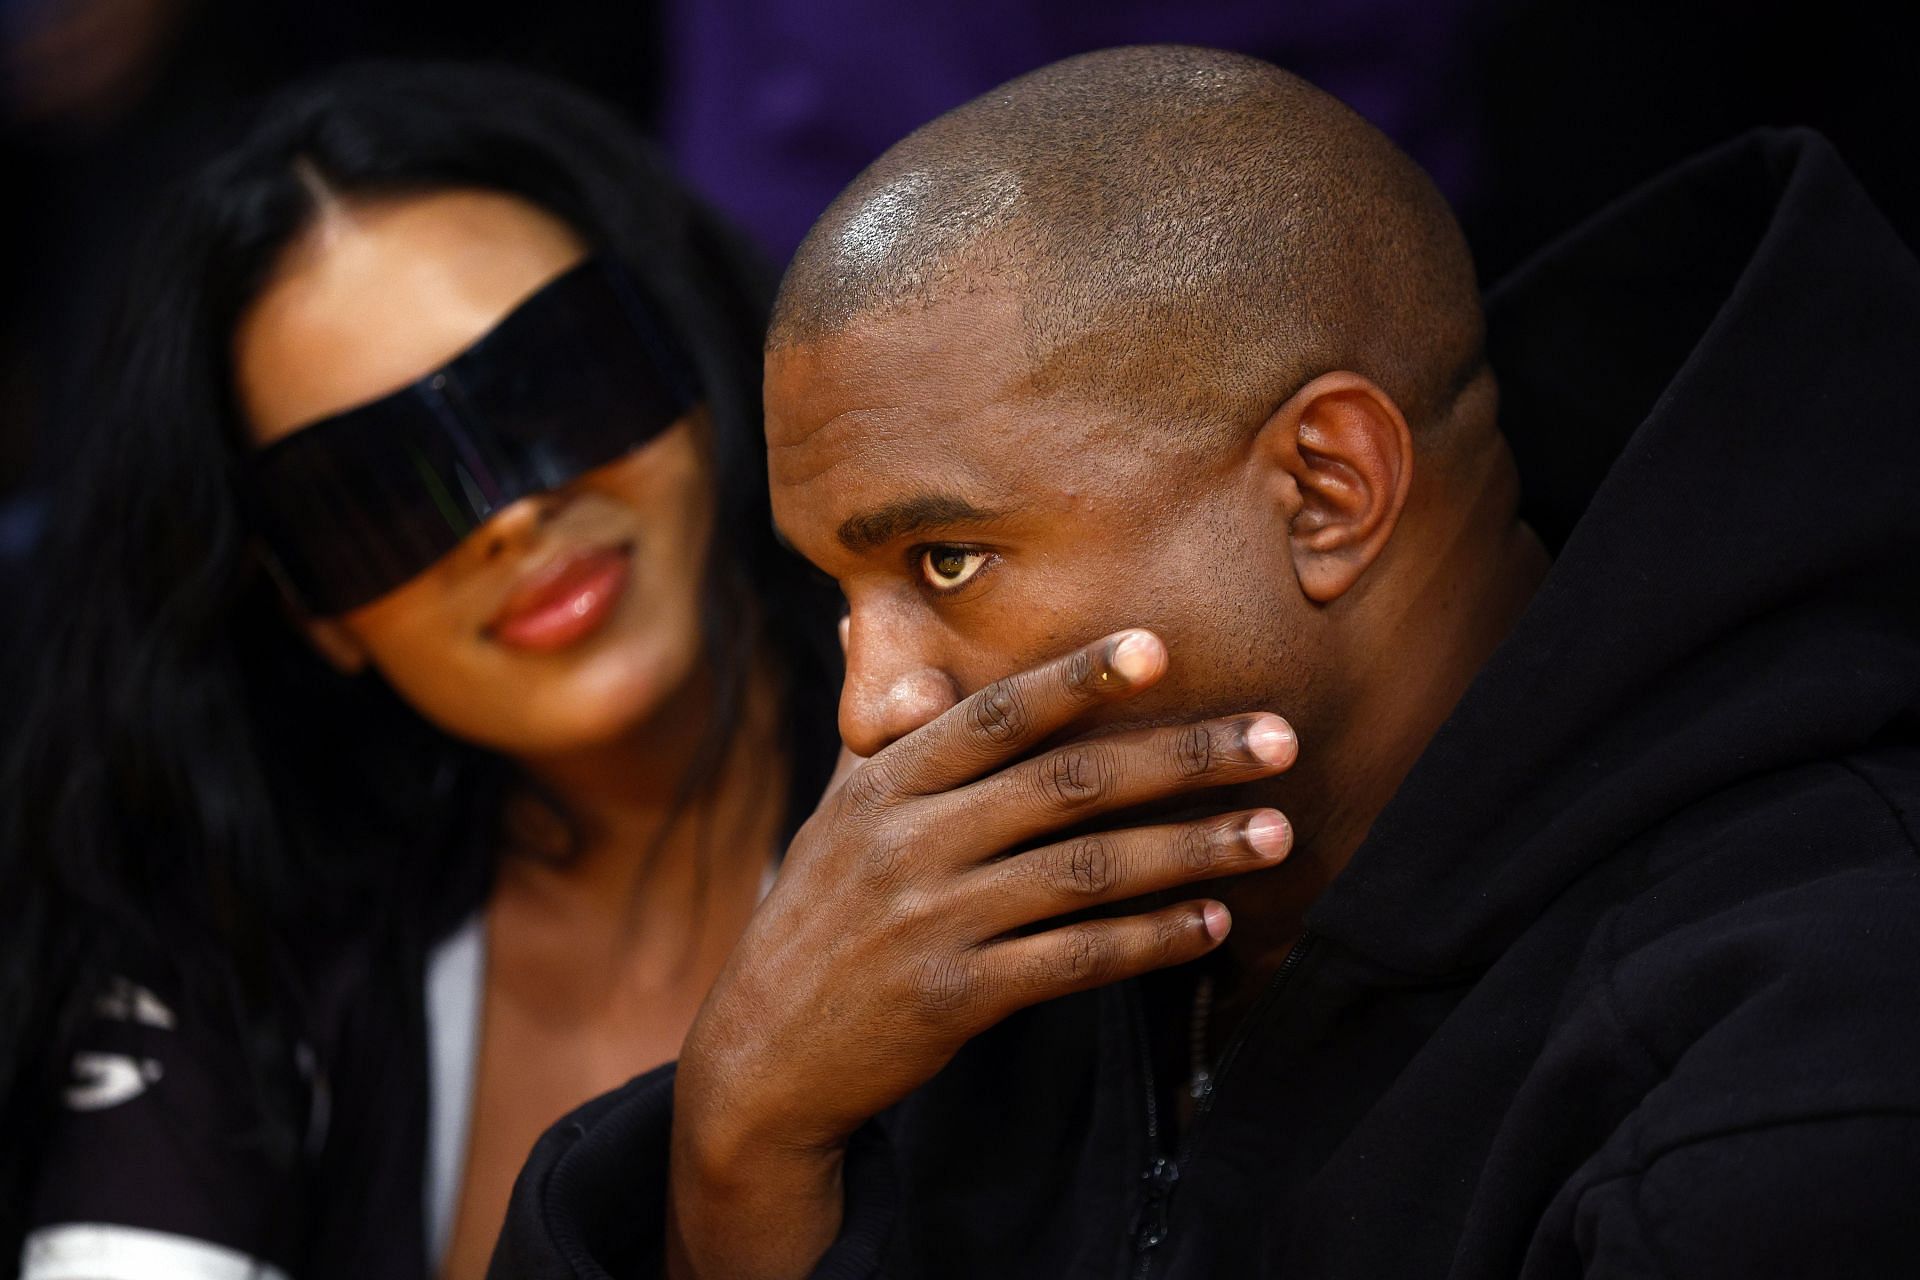 Kanye West attending a Los Angeles Lakers game